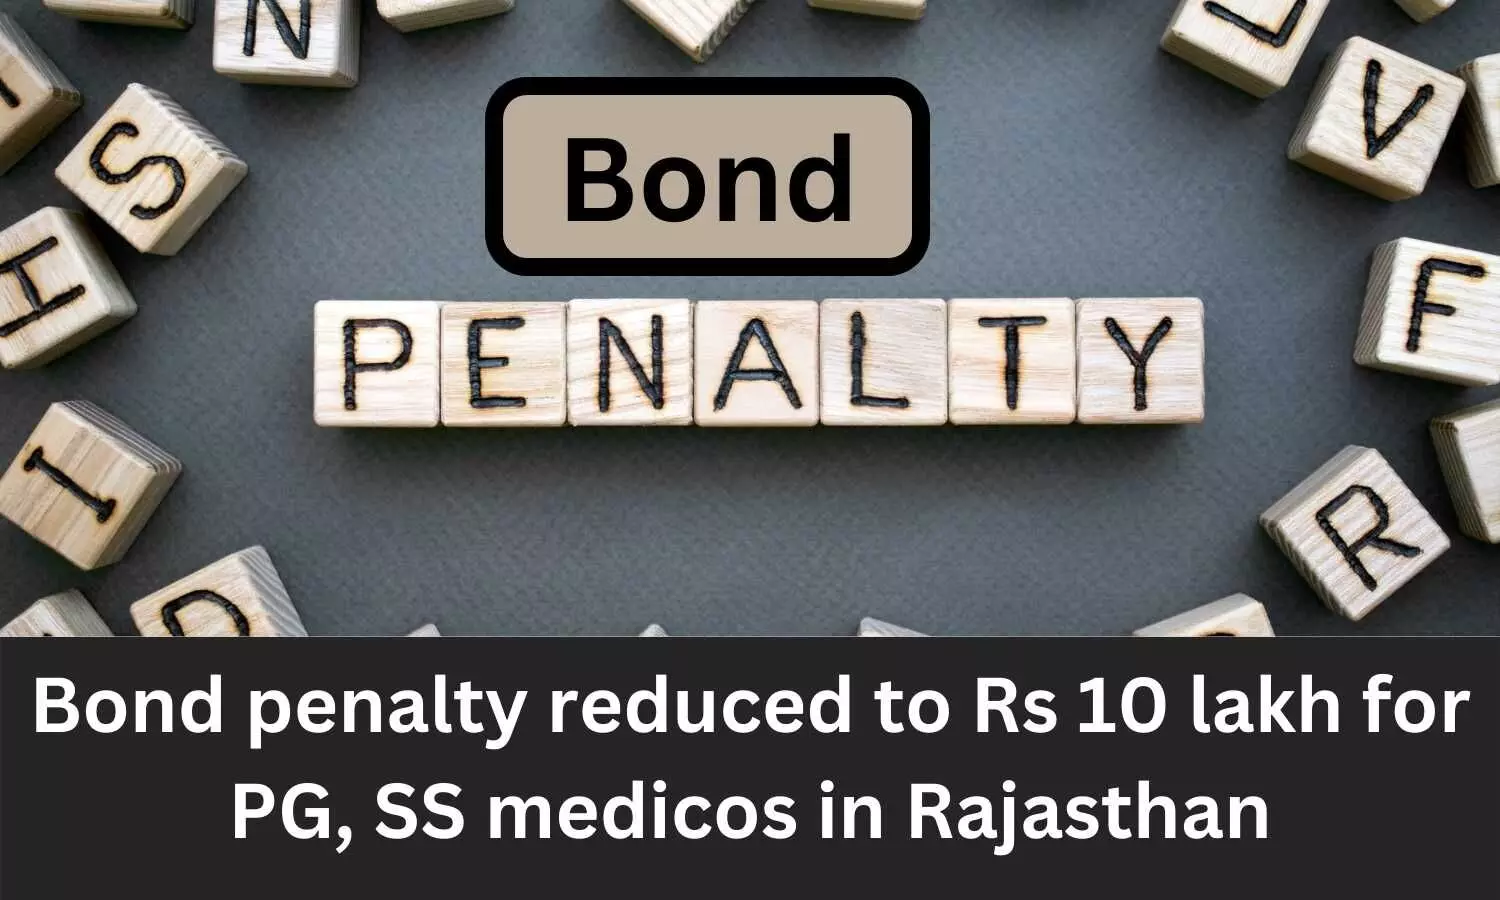 Bond penalty reduced to Rs 10 lakh for PG, SS medicos in Rajasthan, Rs 5 lakh after completing 1 year service